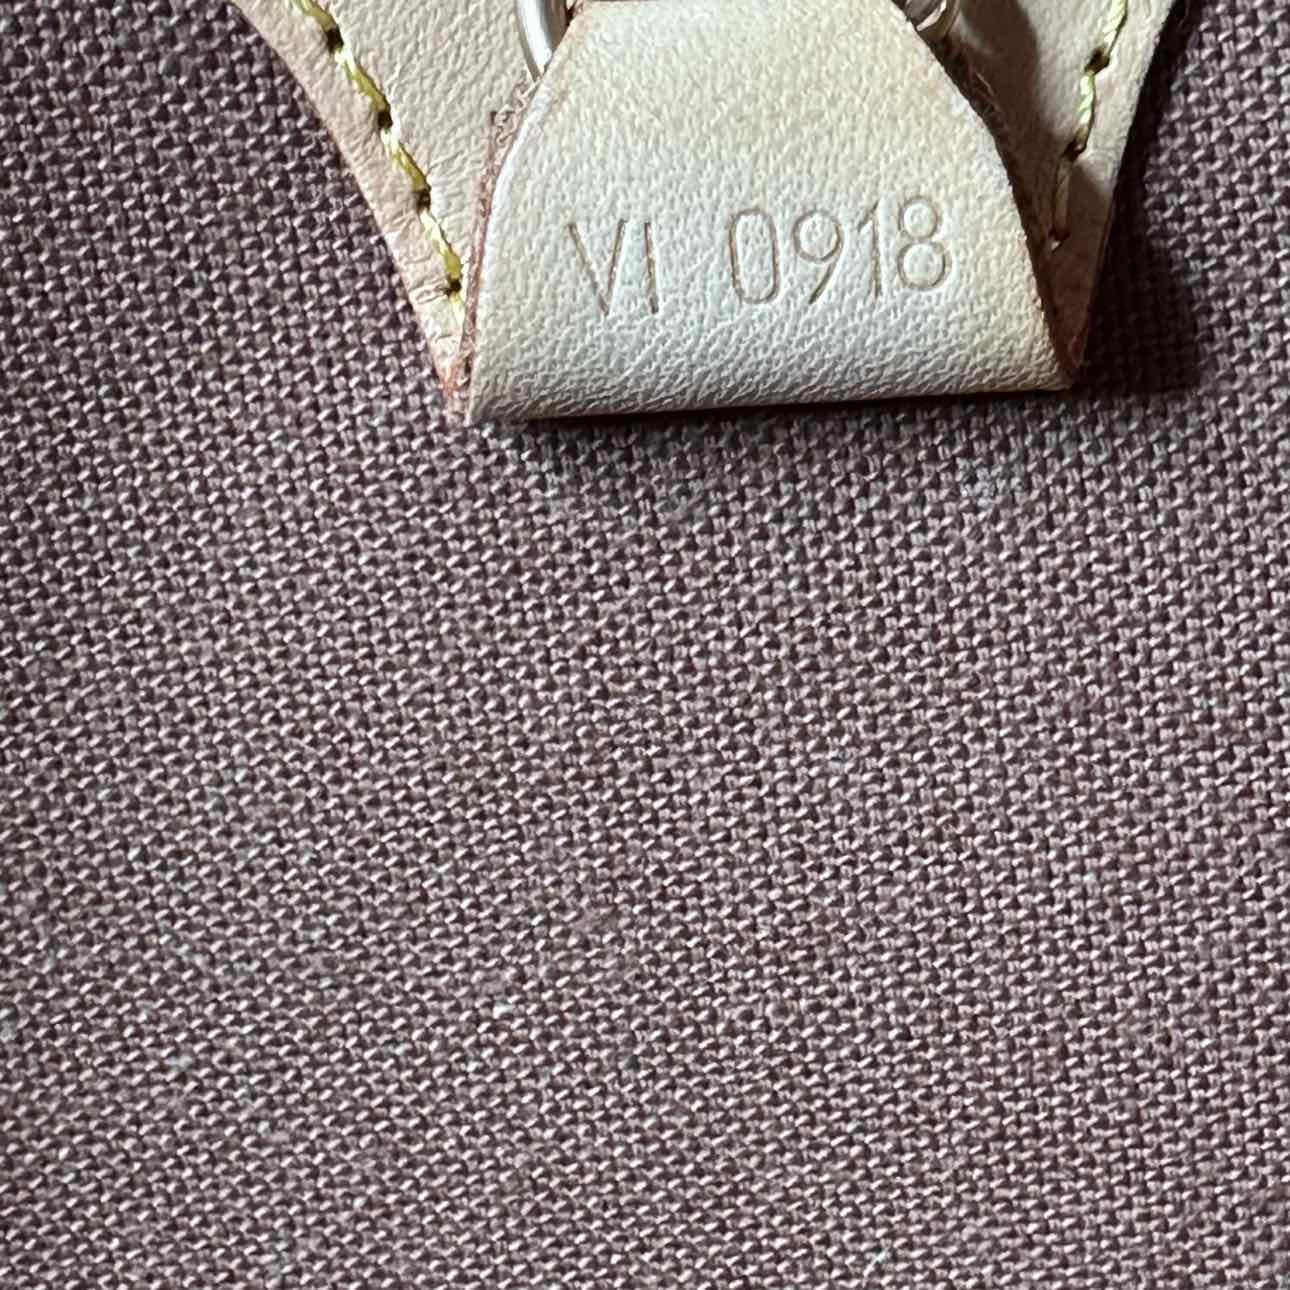 louis Vuitton serial number